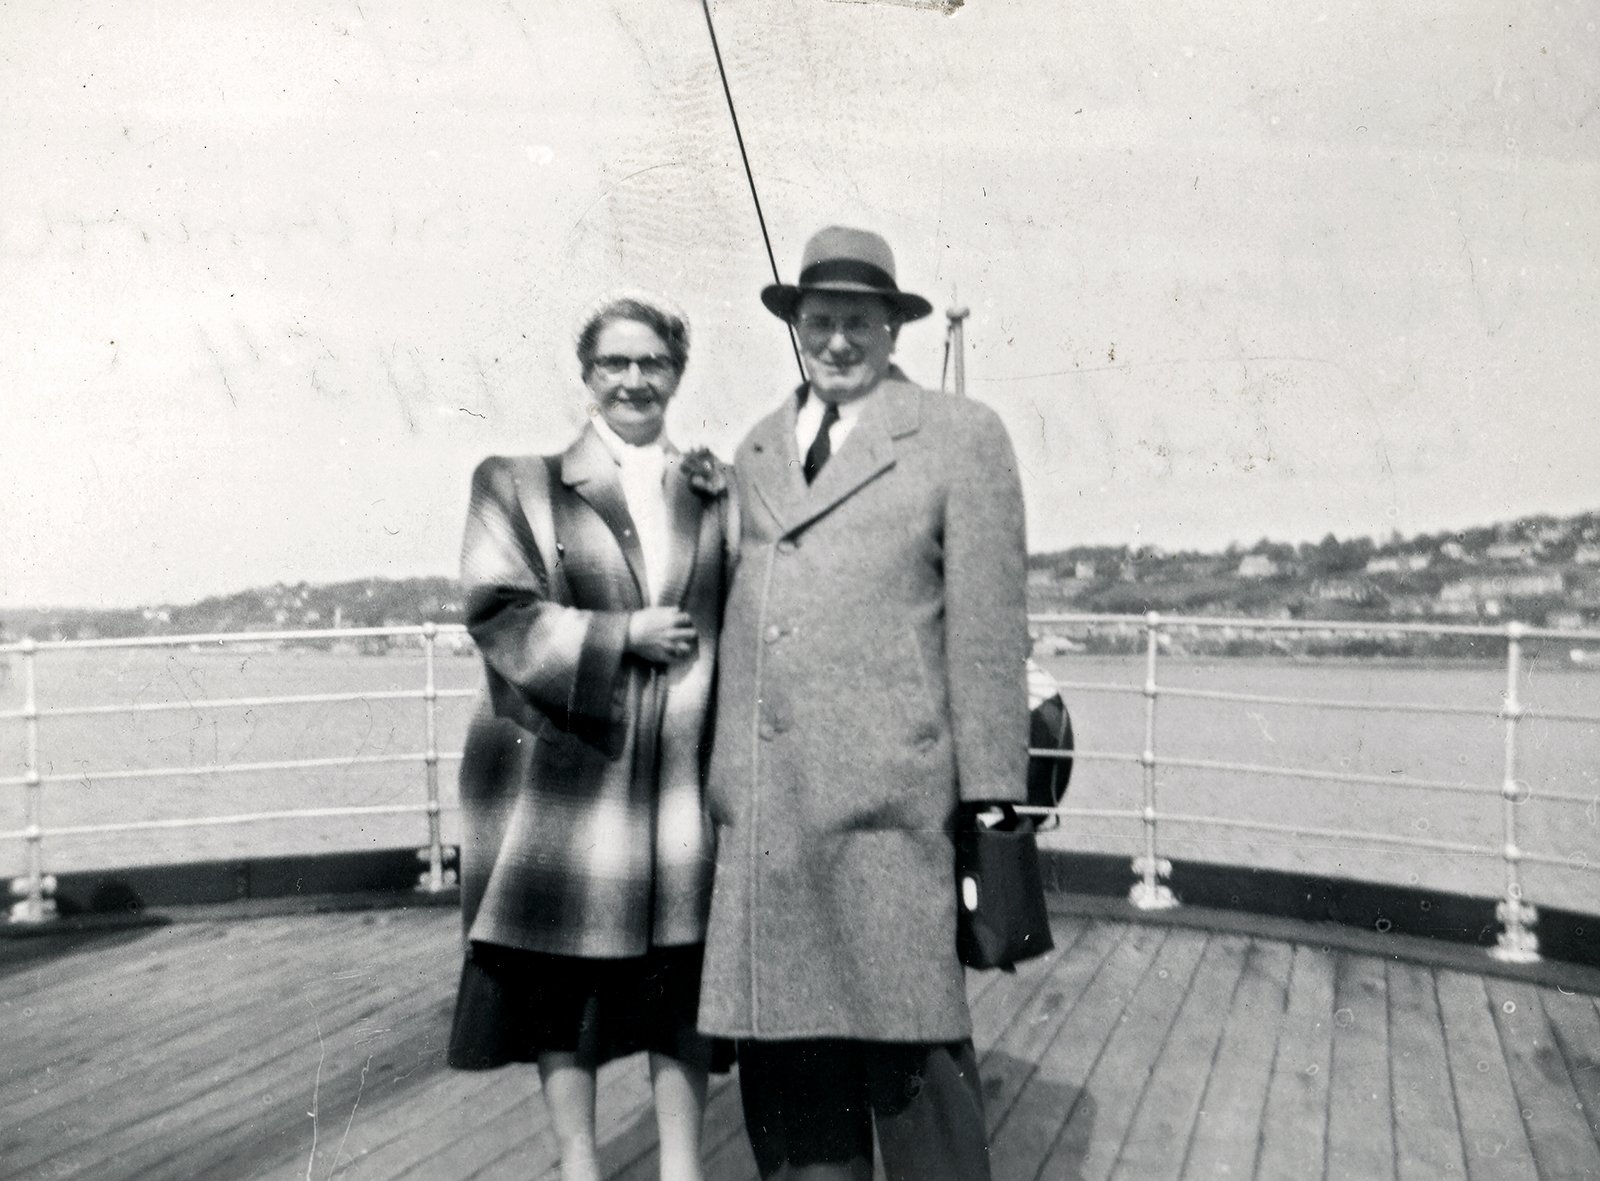 Beth’s paternal grandparents Patrick Joseph and Mary Rose McNally travelled from Massachusetts to Ireland for their anniversary in May 1954, on board the T.S.S. Olympia.